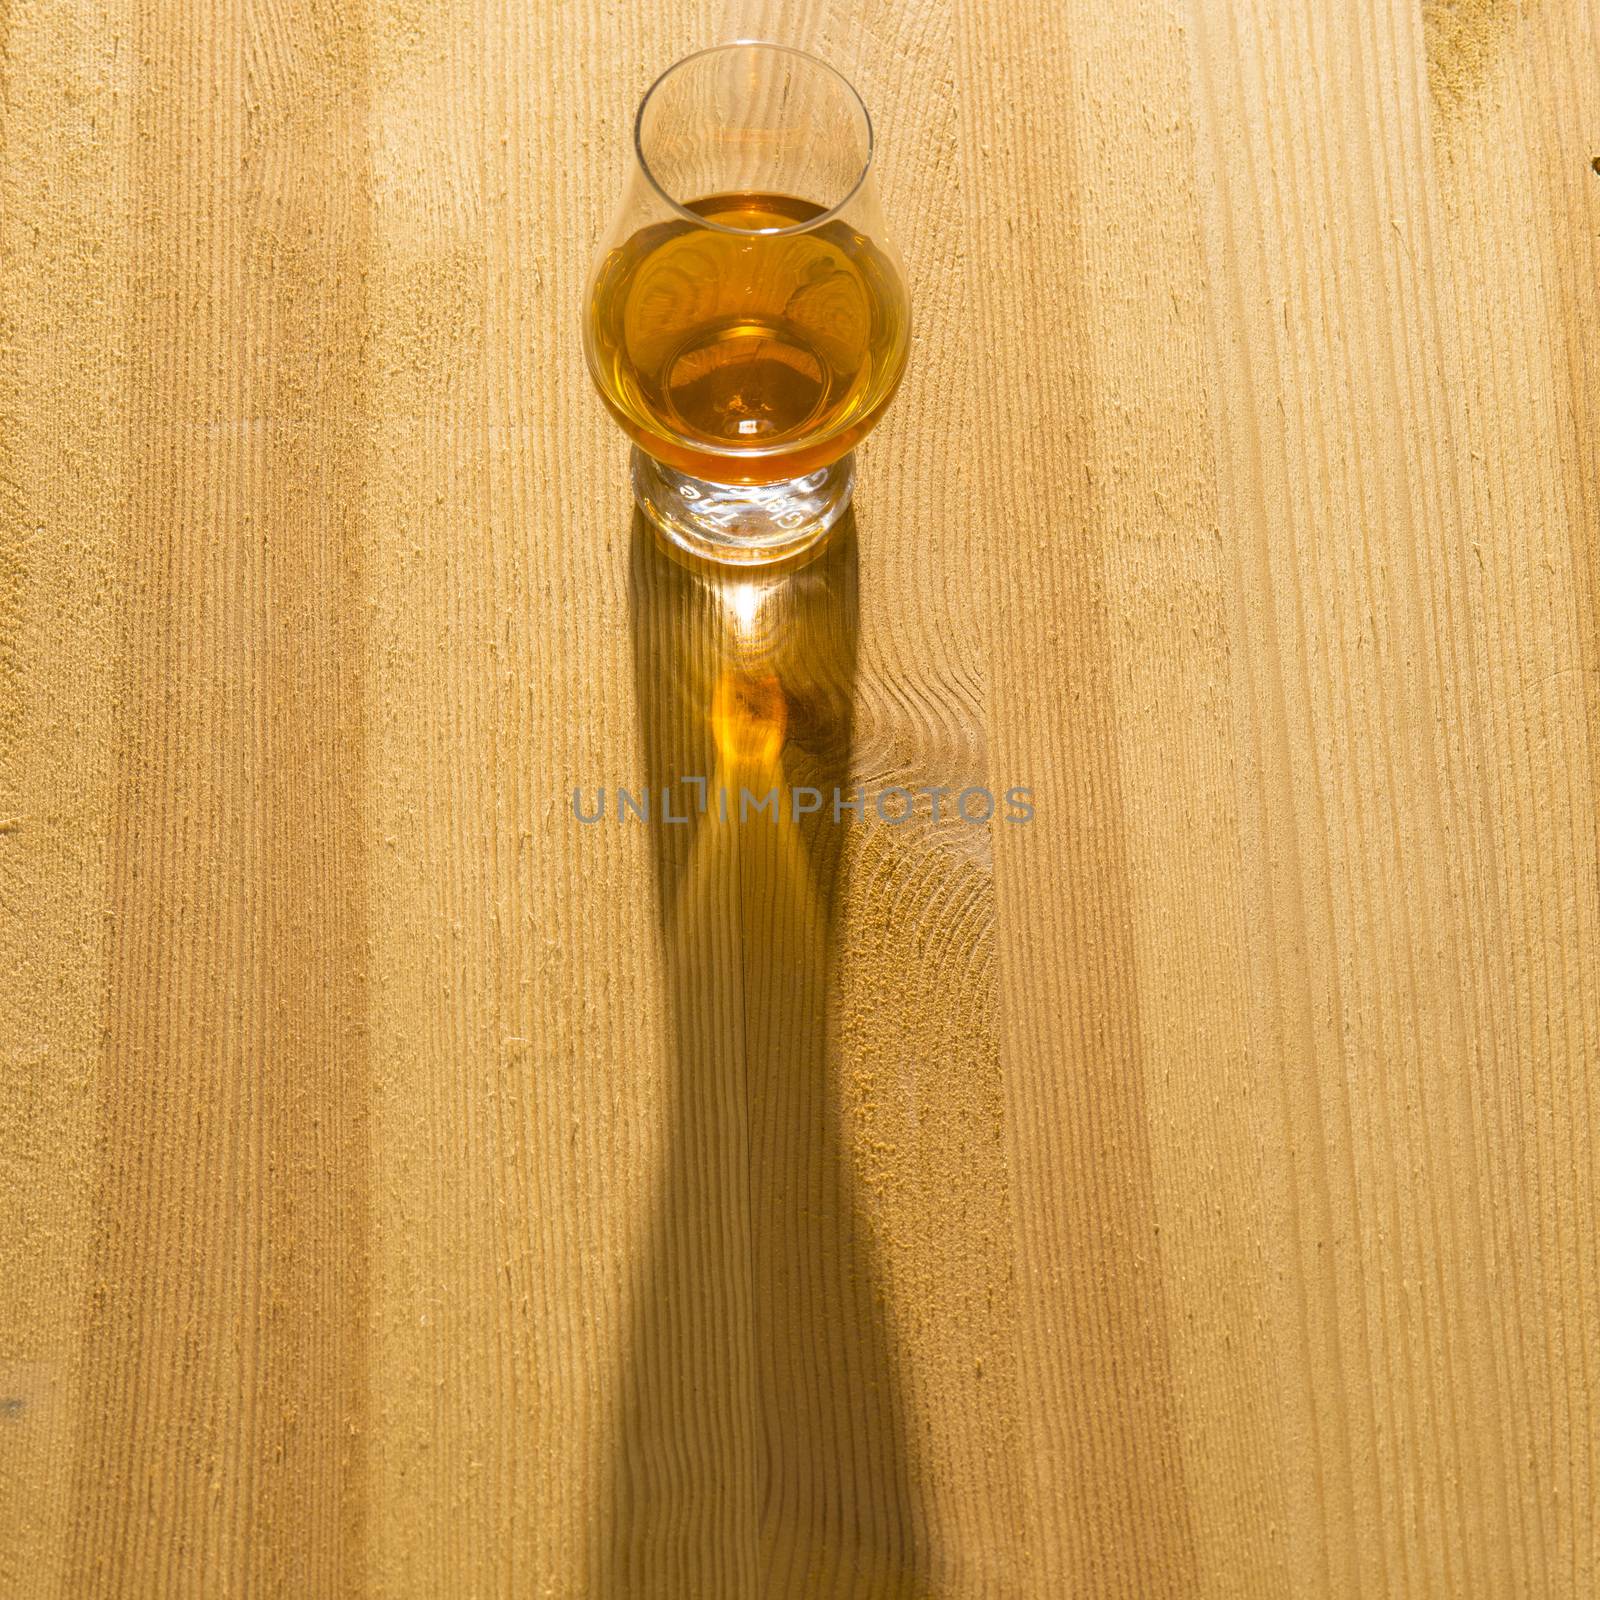 Whisky with sun shadow